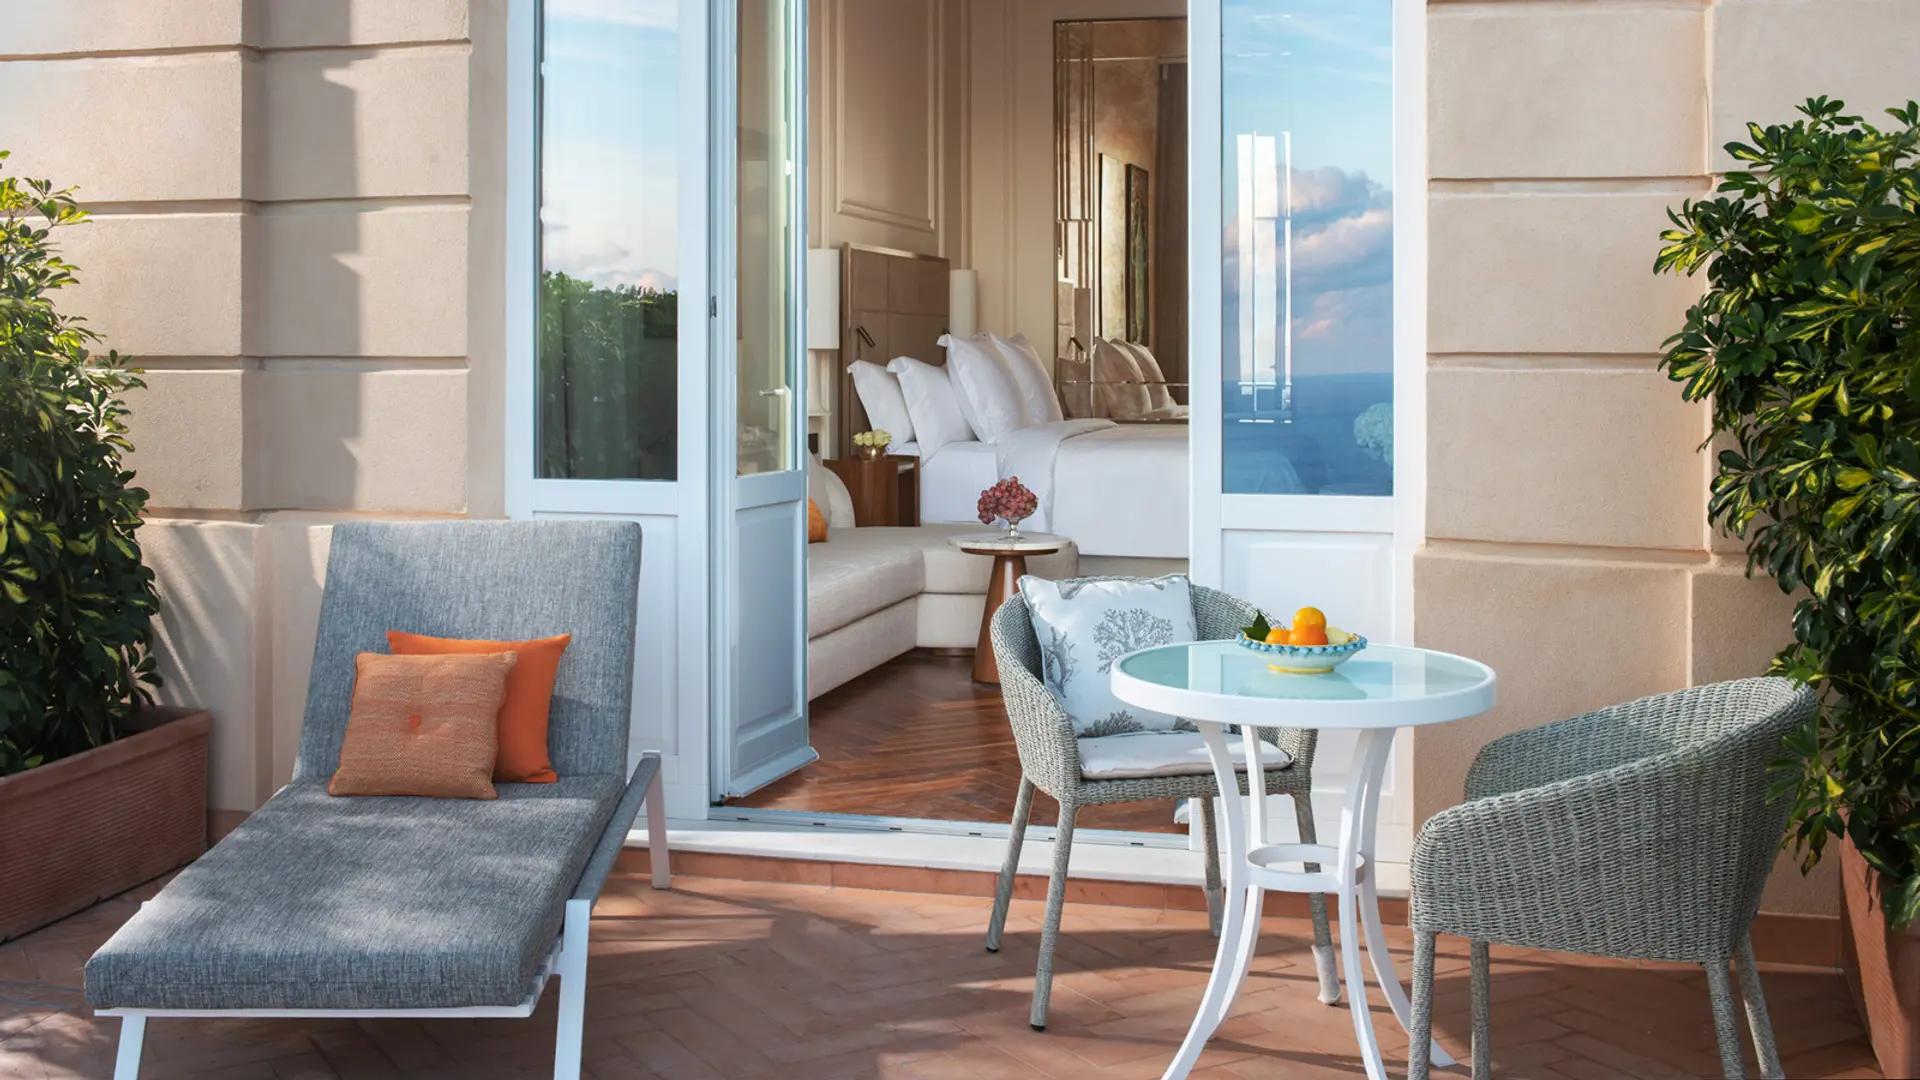 Hotels Articles - Four Seasons set to reopen the San Domenico Palace